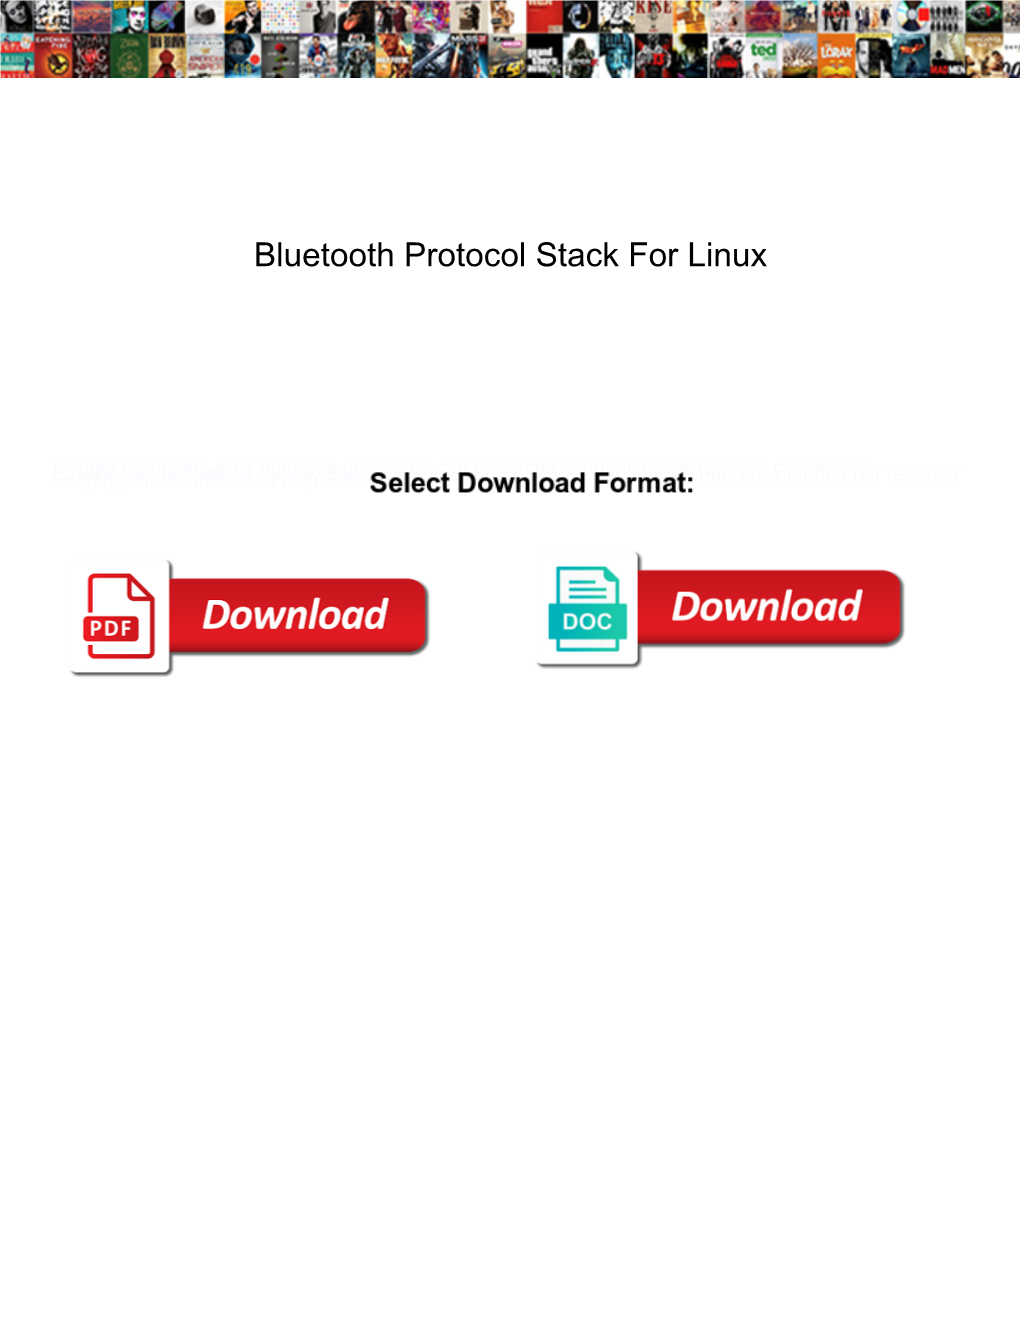 Bluetooth Protocol Stack for Linux